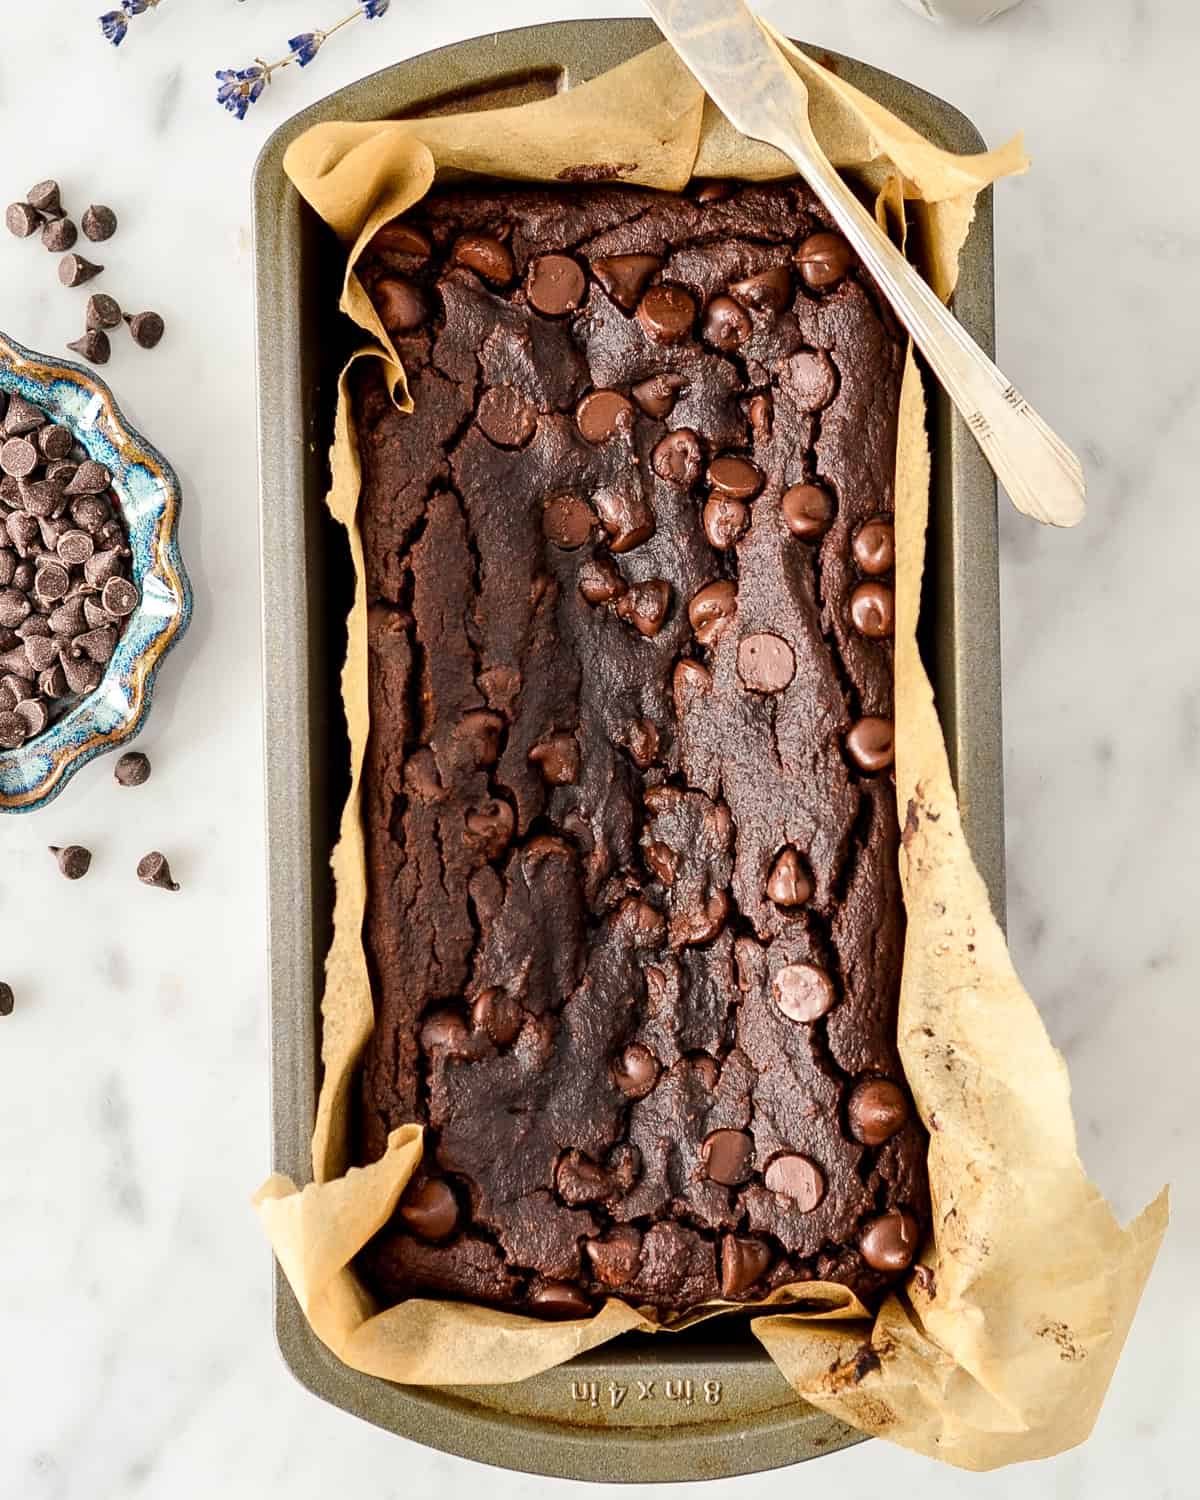 Paleo Chocolate Zucchini Bread in a loaf pan after baking